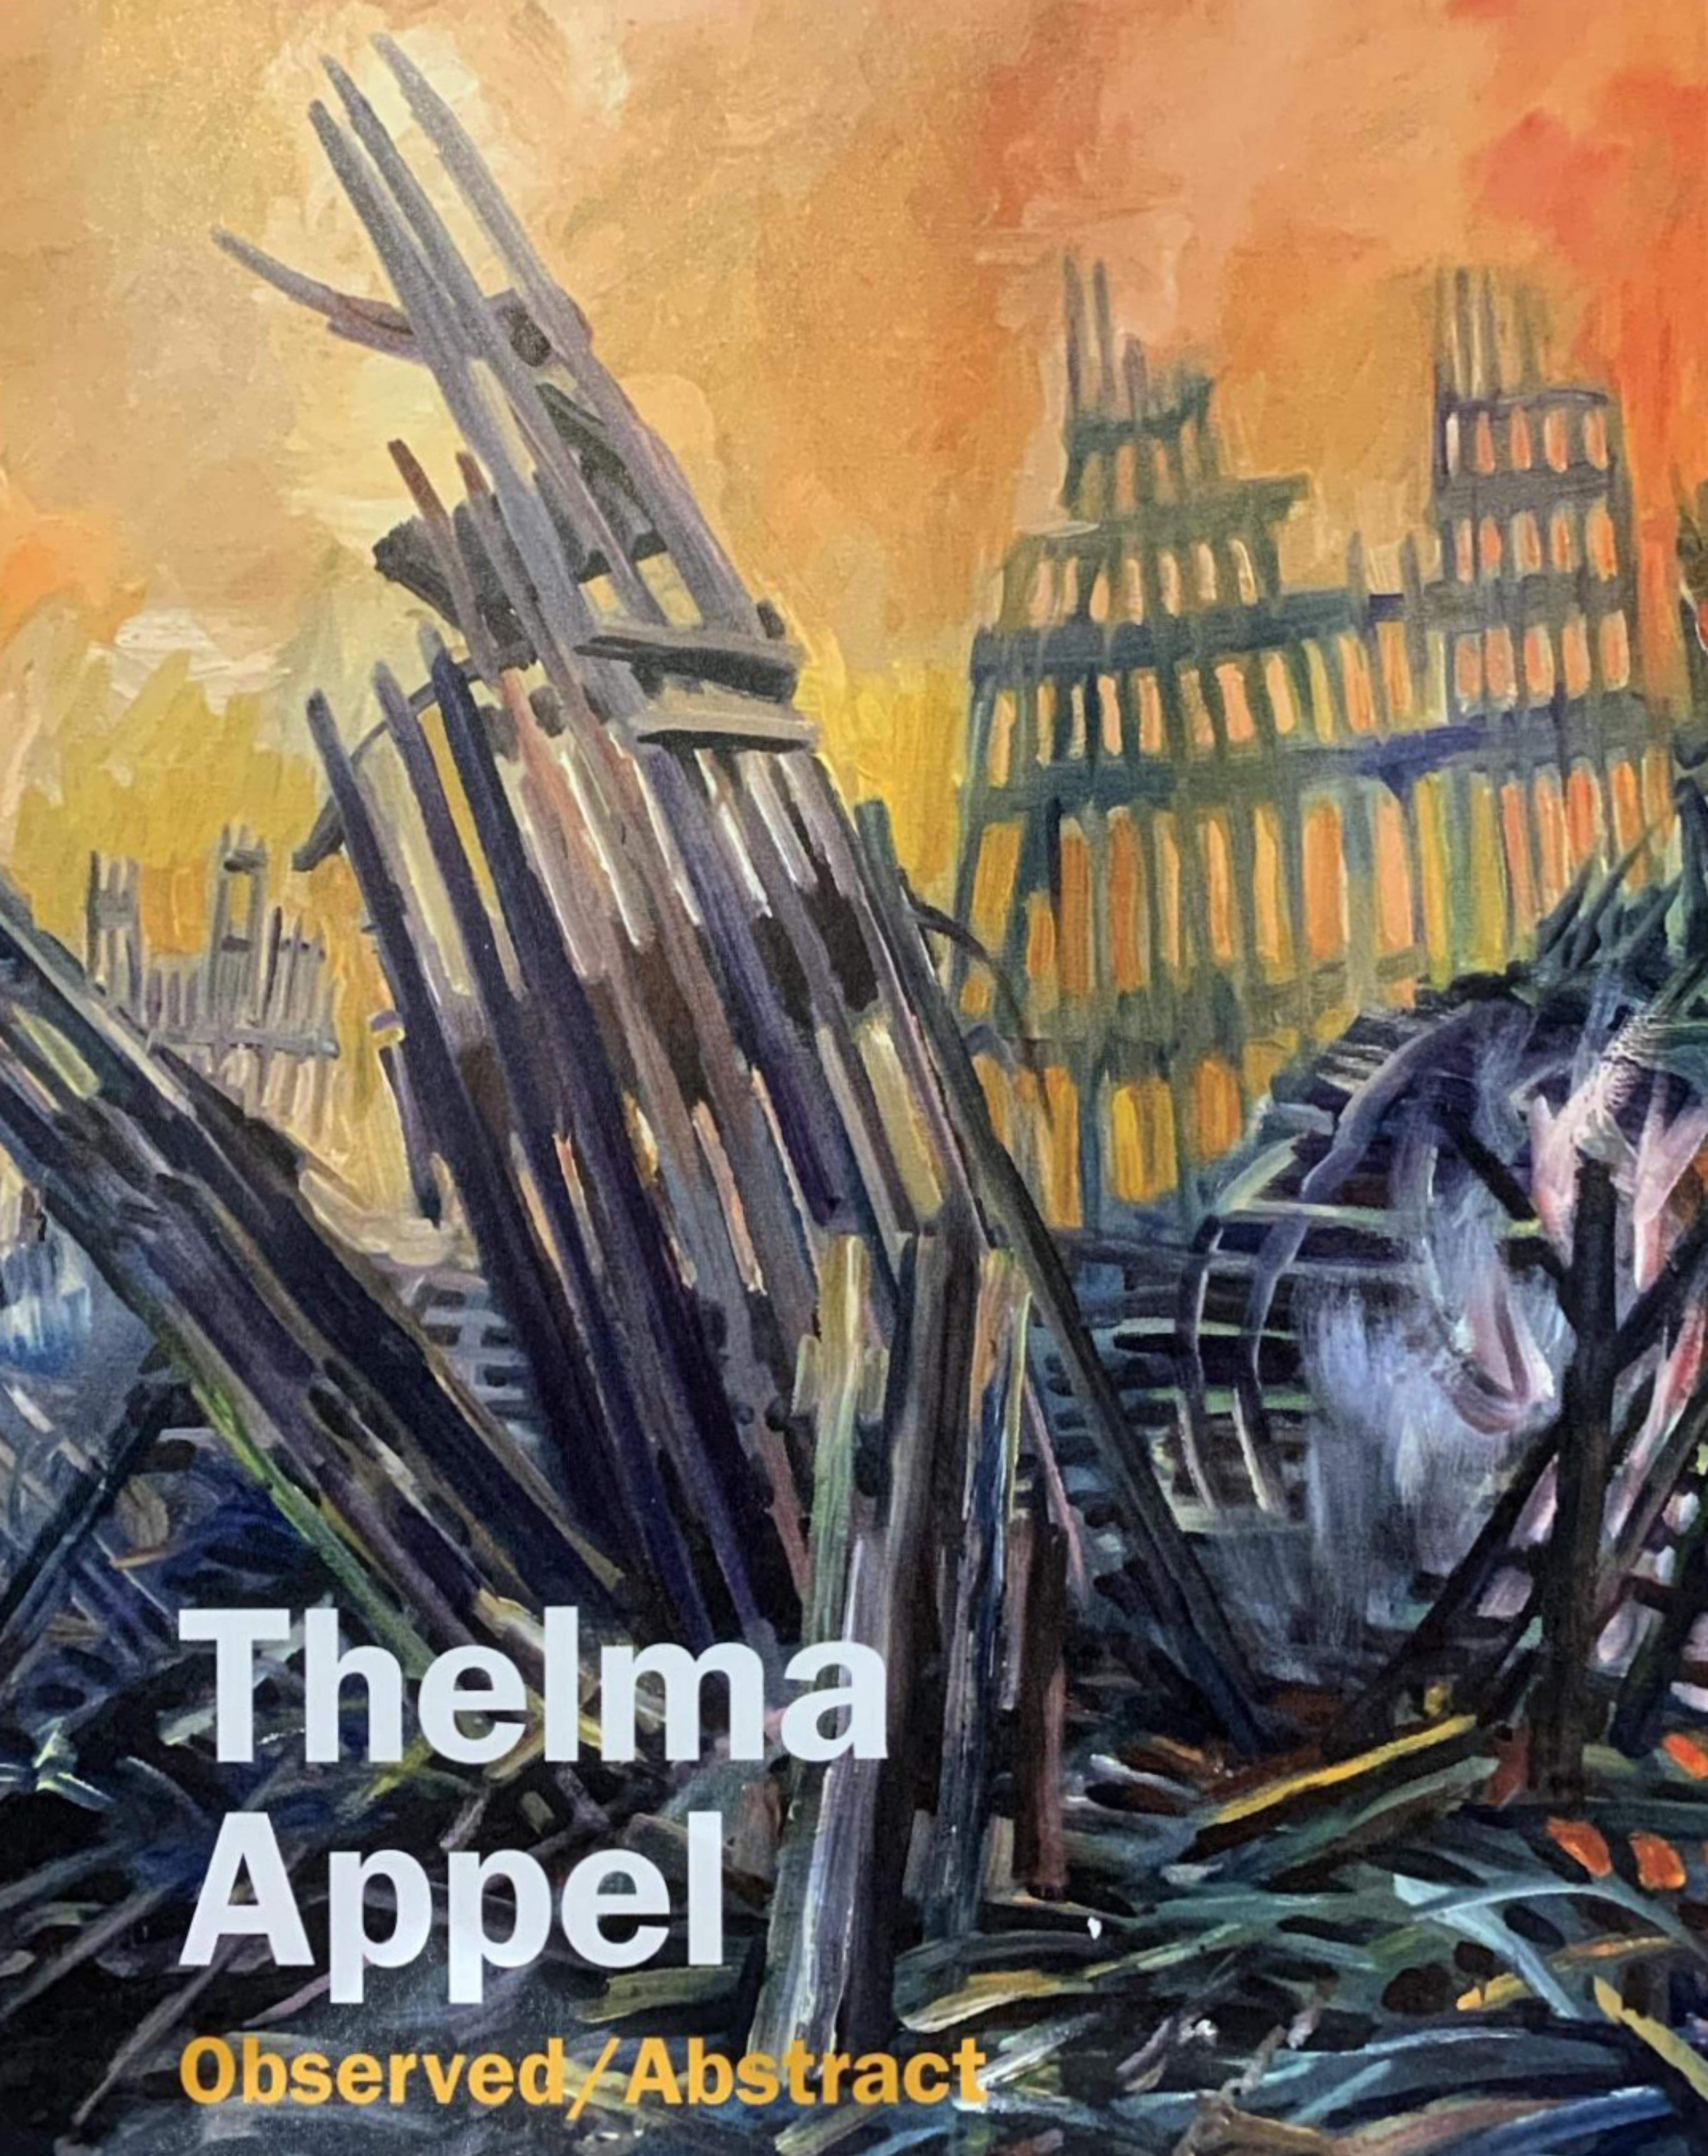 Journey Through Hell - Realist Painting by Thelma Appel